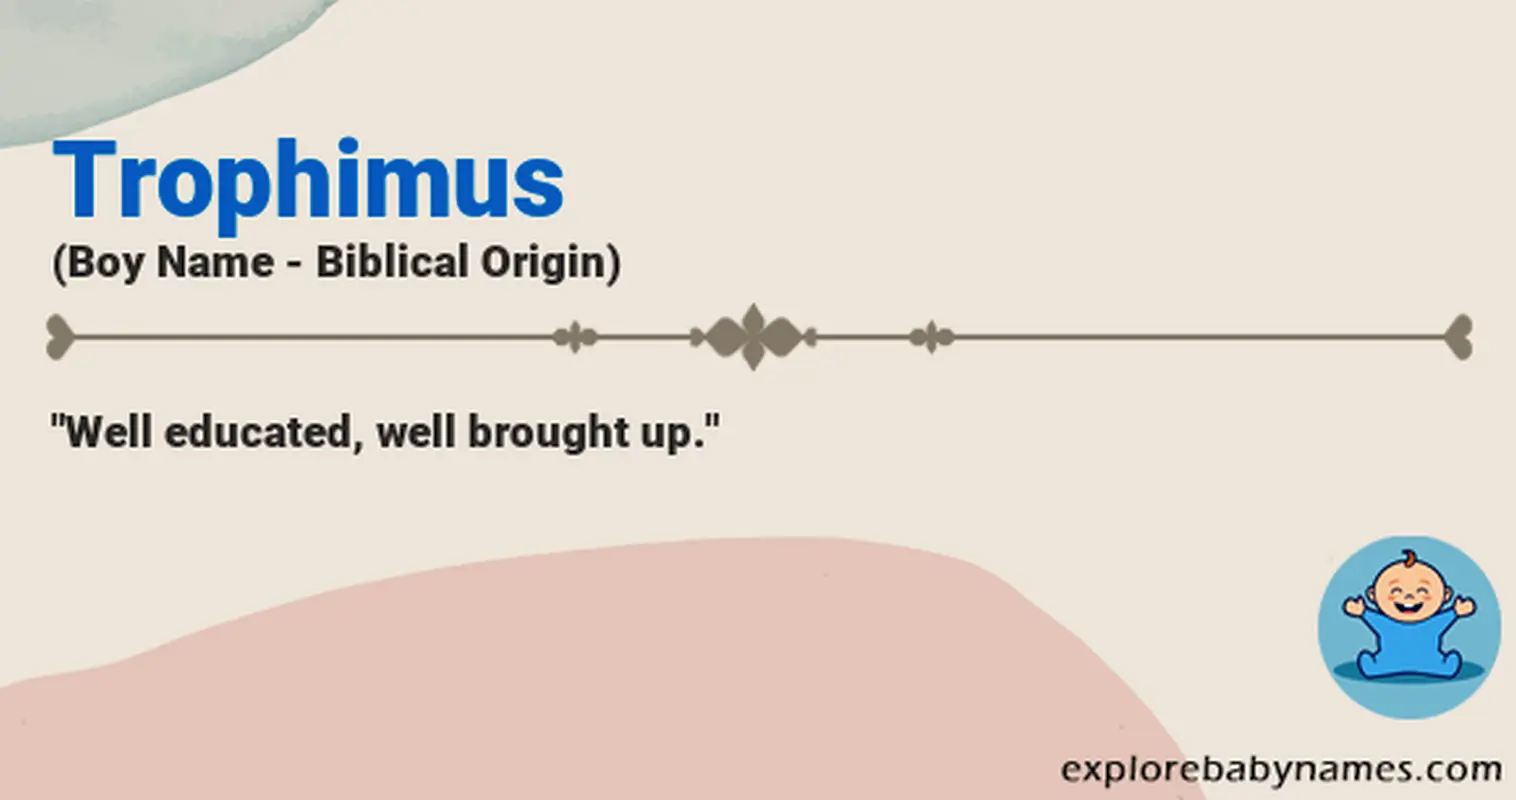 Meaning of Trophimus